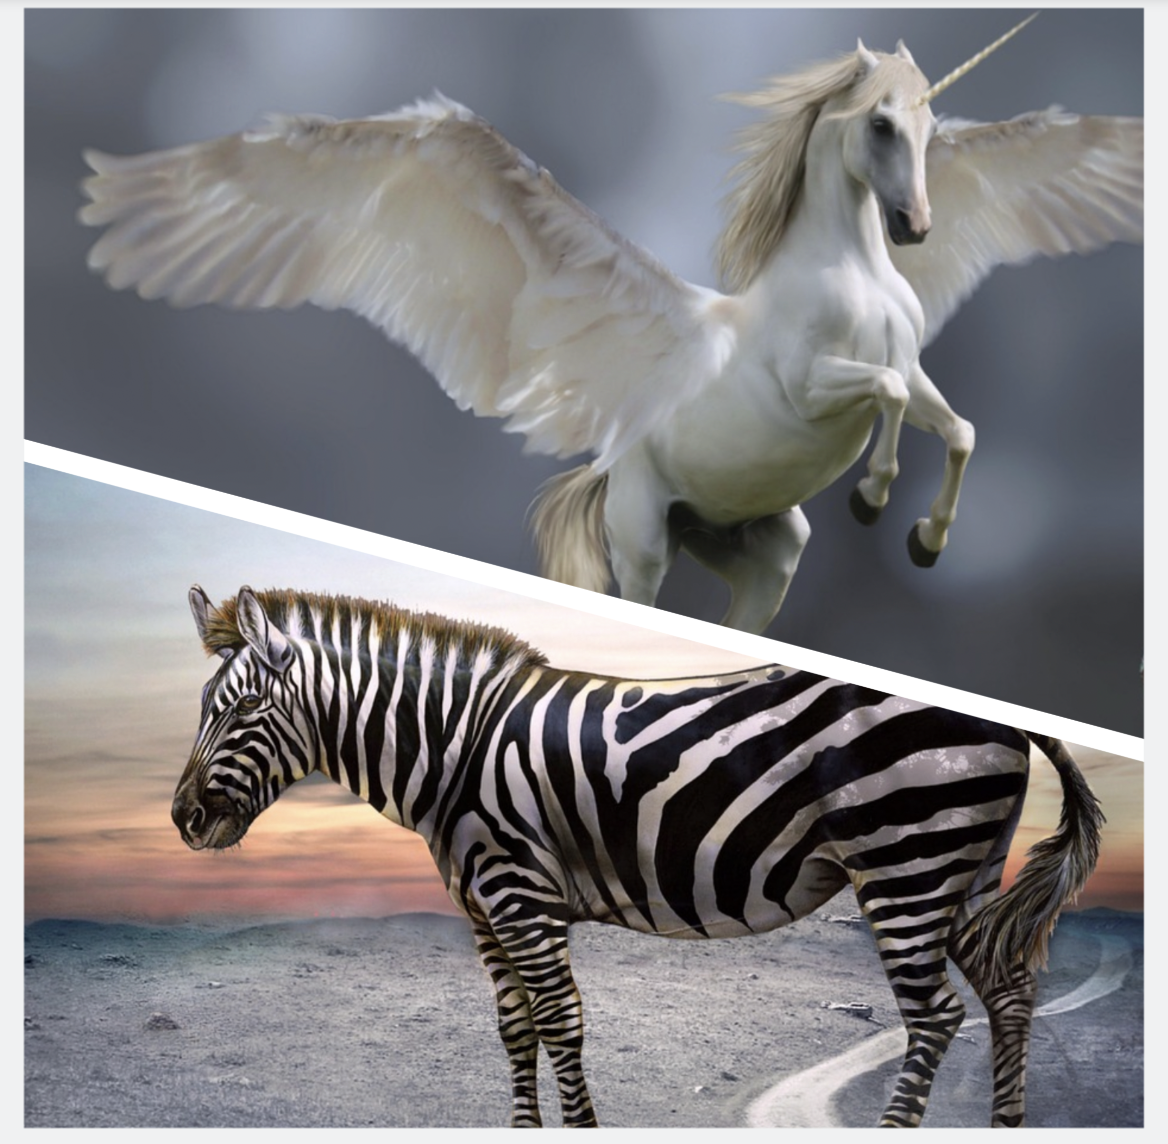 From Unicorn to Zebra: The transformation of ZGF